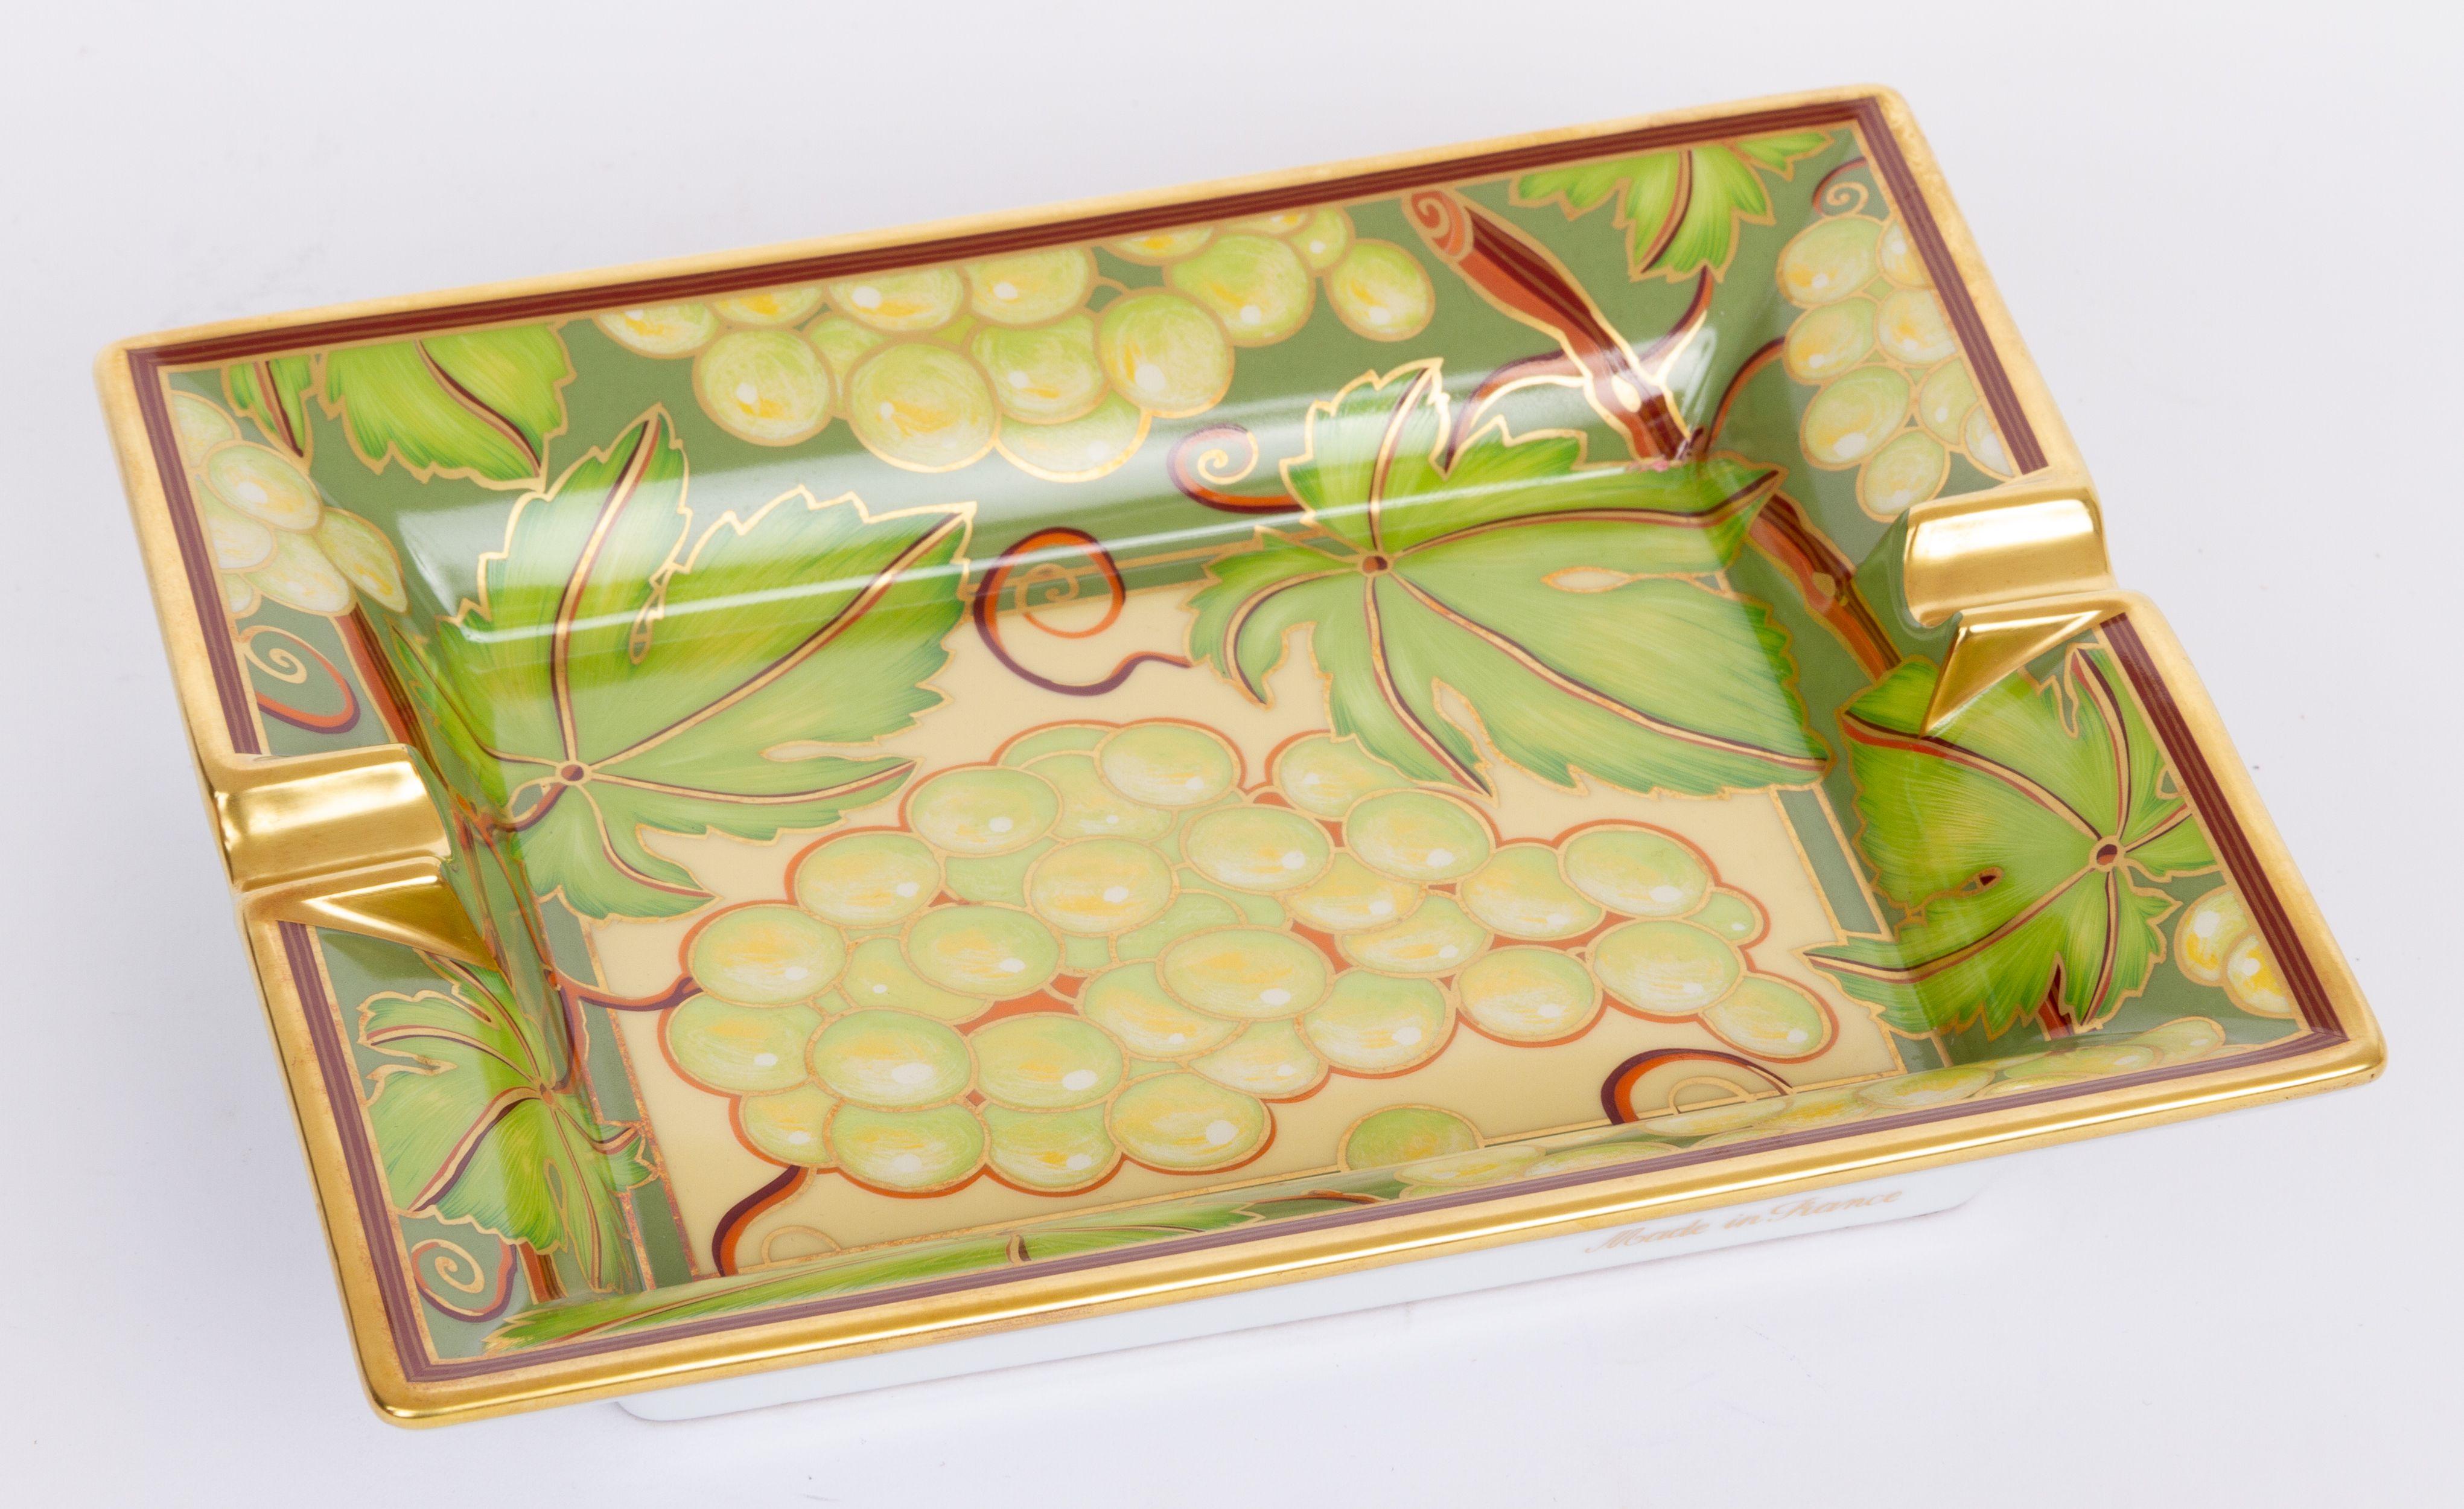 Hermès vintage porcelain ashtray in a green gold. The print are multiple grapes which are decorated over the whole piece. The ashtray is in excellent condition.